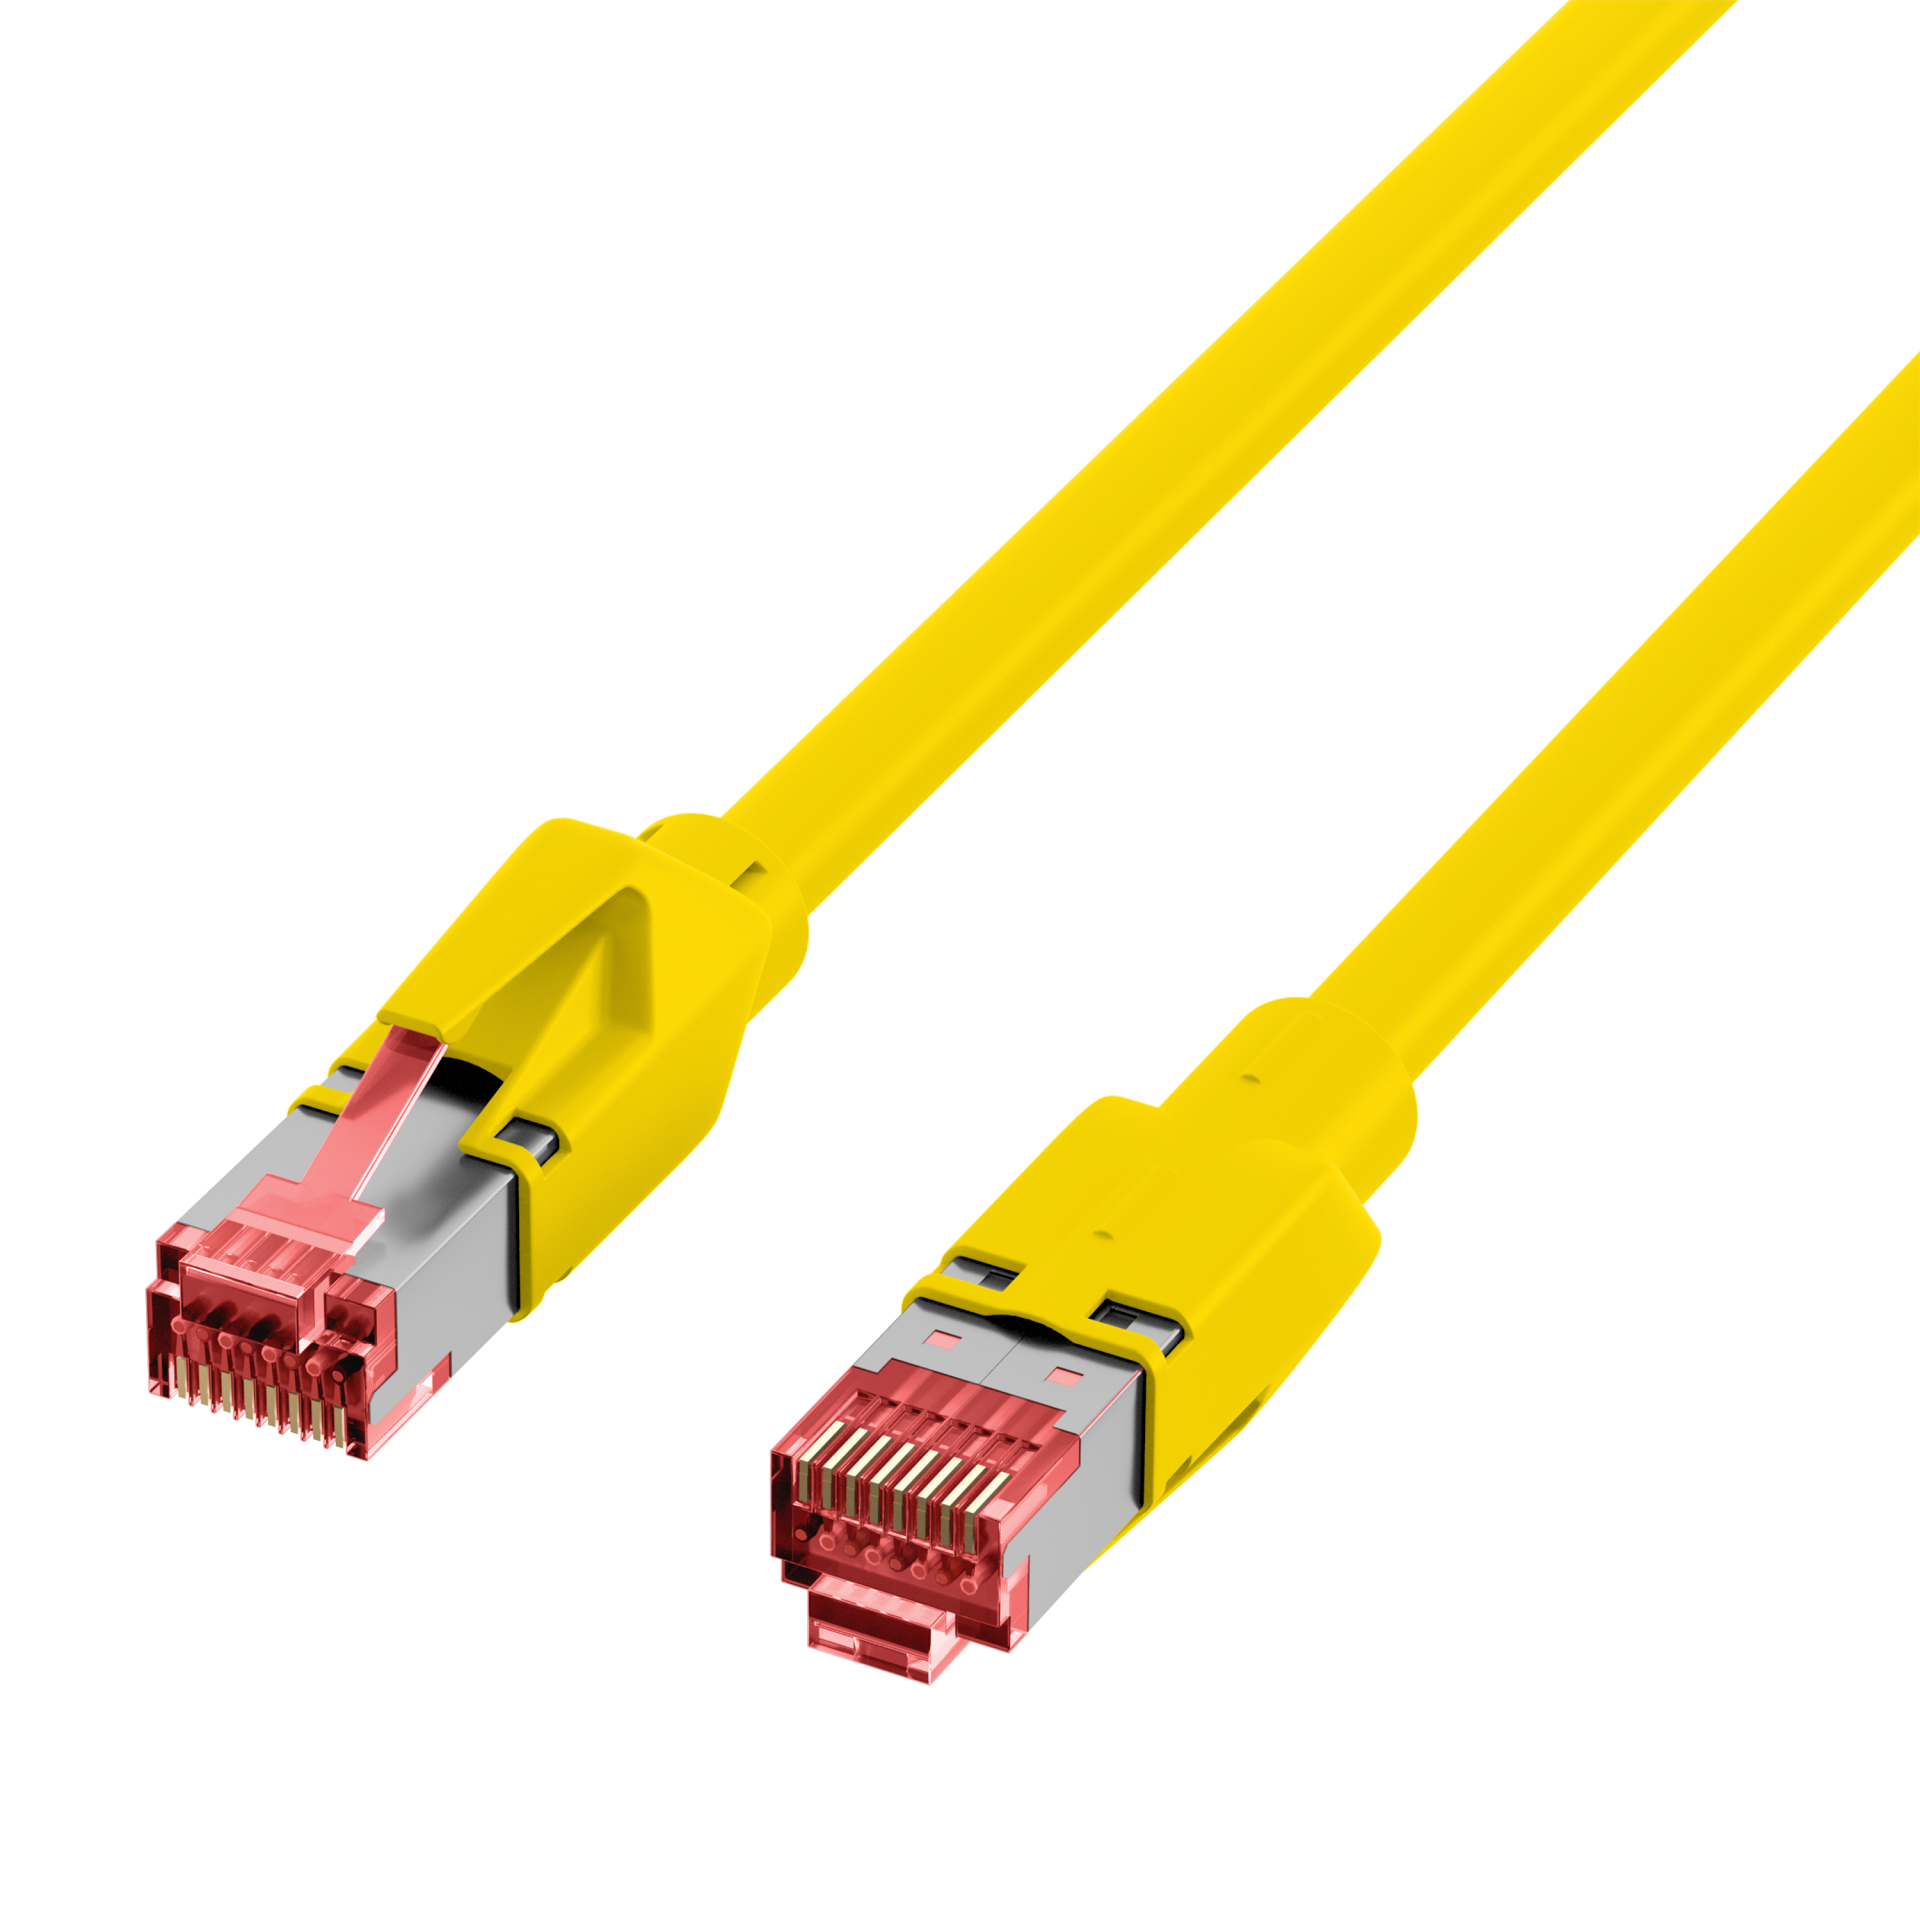 RJ45 Patch Cord Cat.5e SF/UTP PURTM21 for drag chains yellow 10m